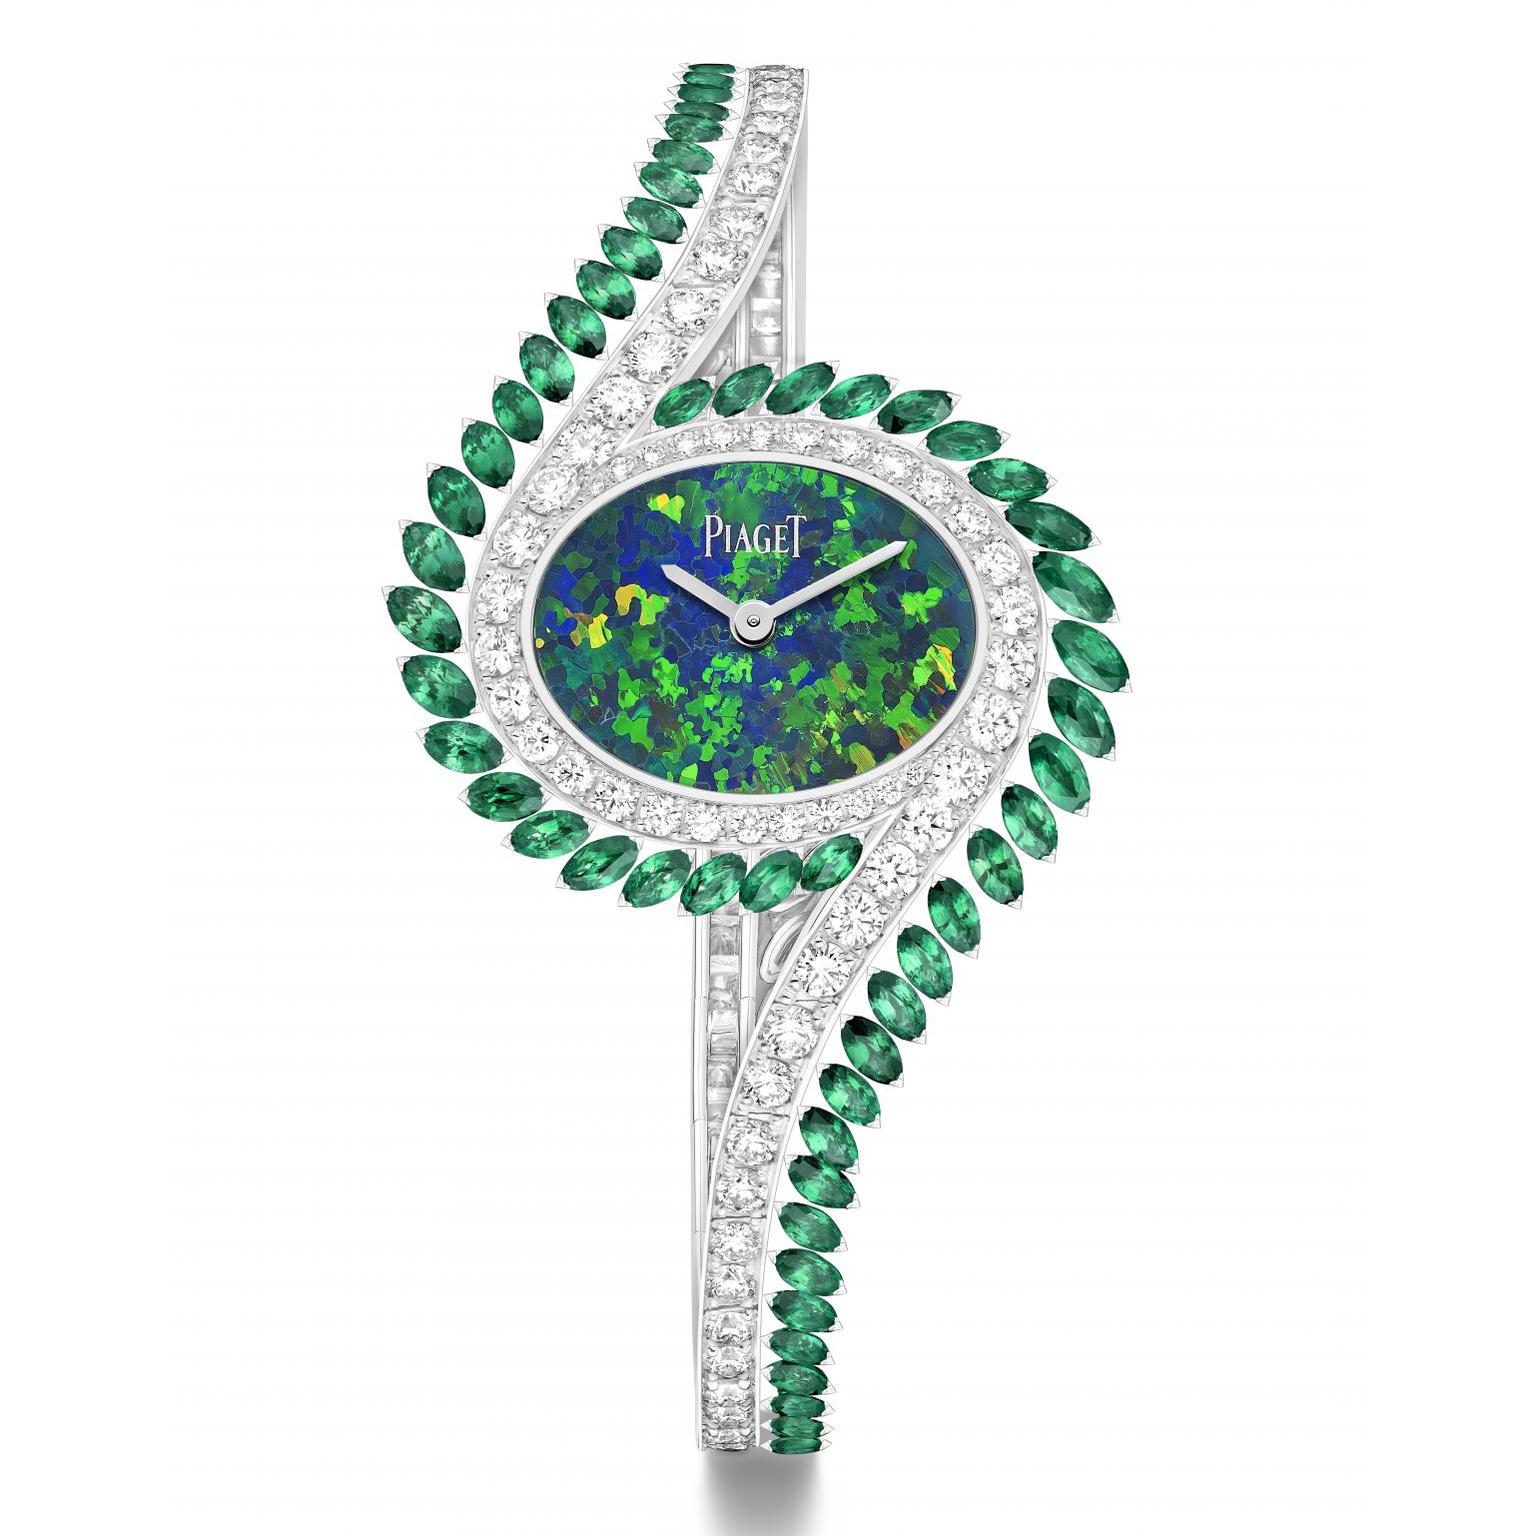 Limelight Gala watch with Opal dial by Piaget